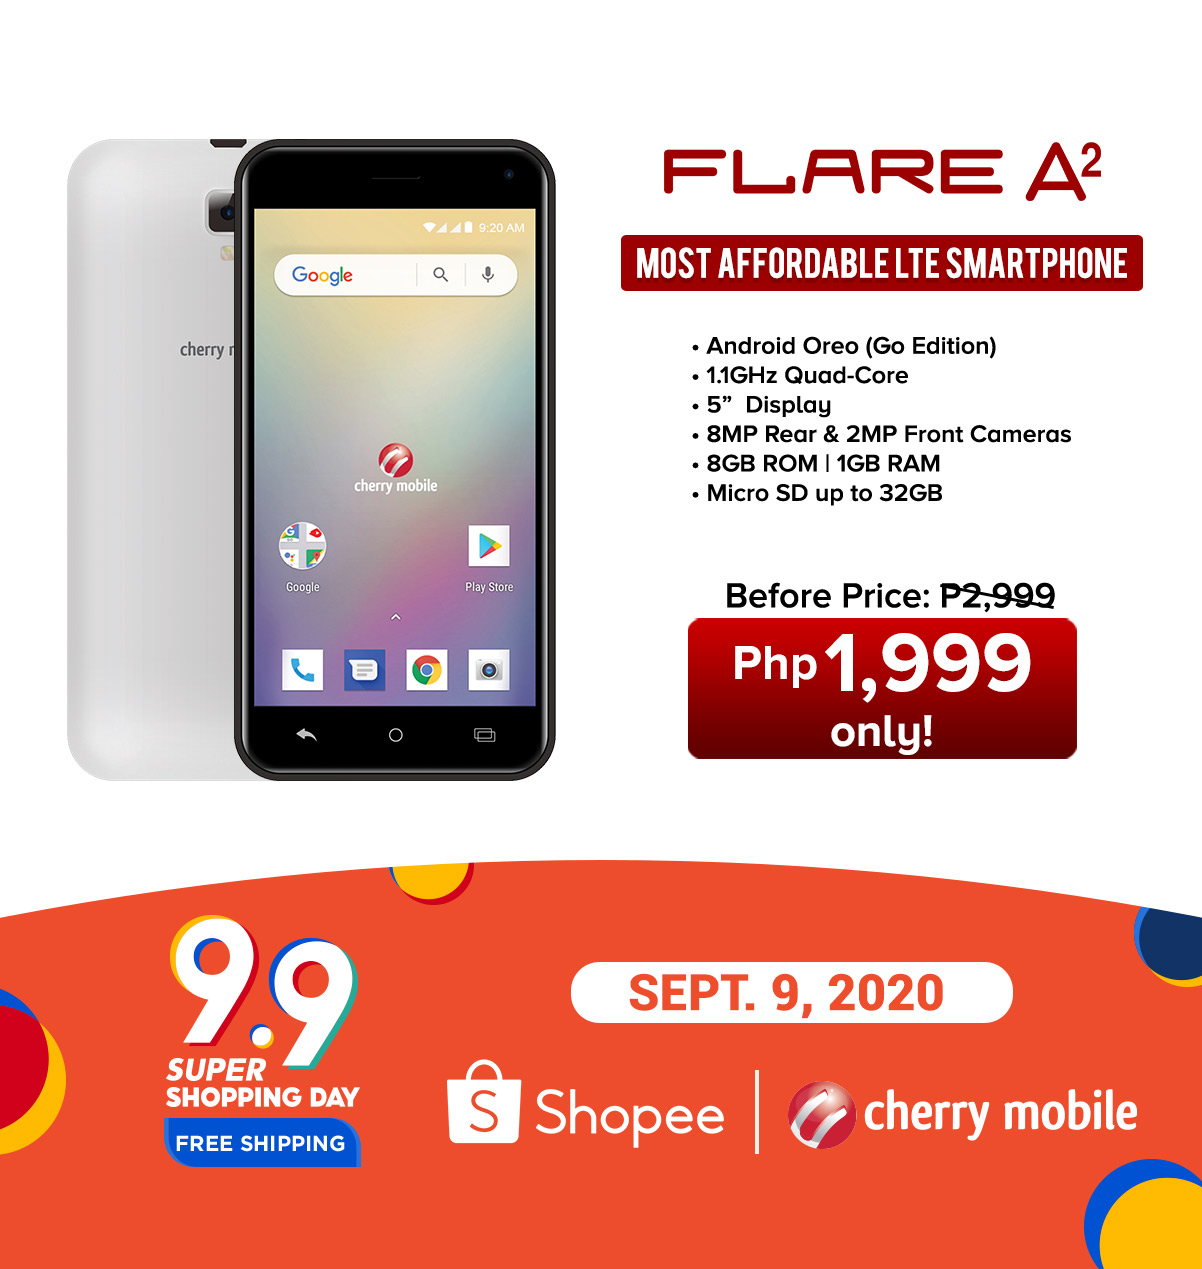 Cherry Mobile Shopee 9.9 Super Shopping Day